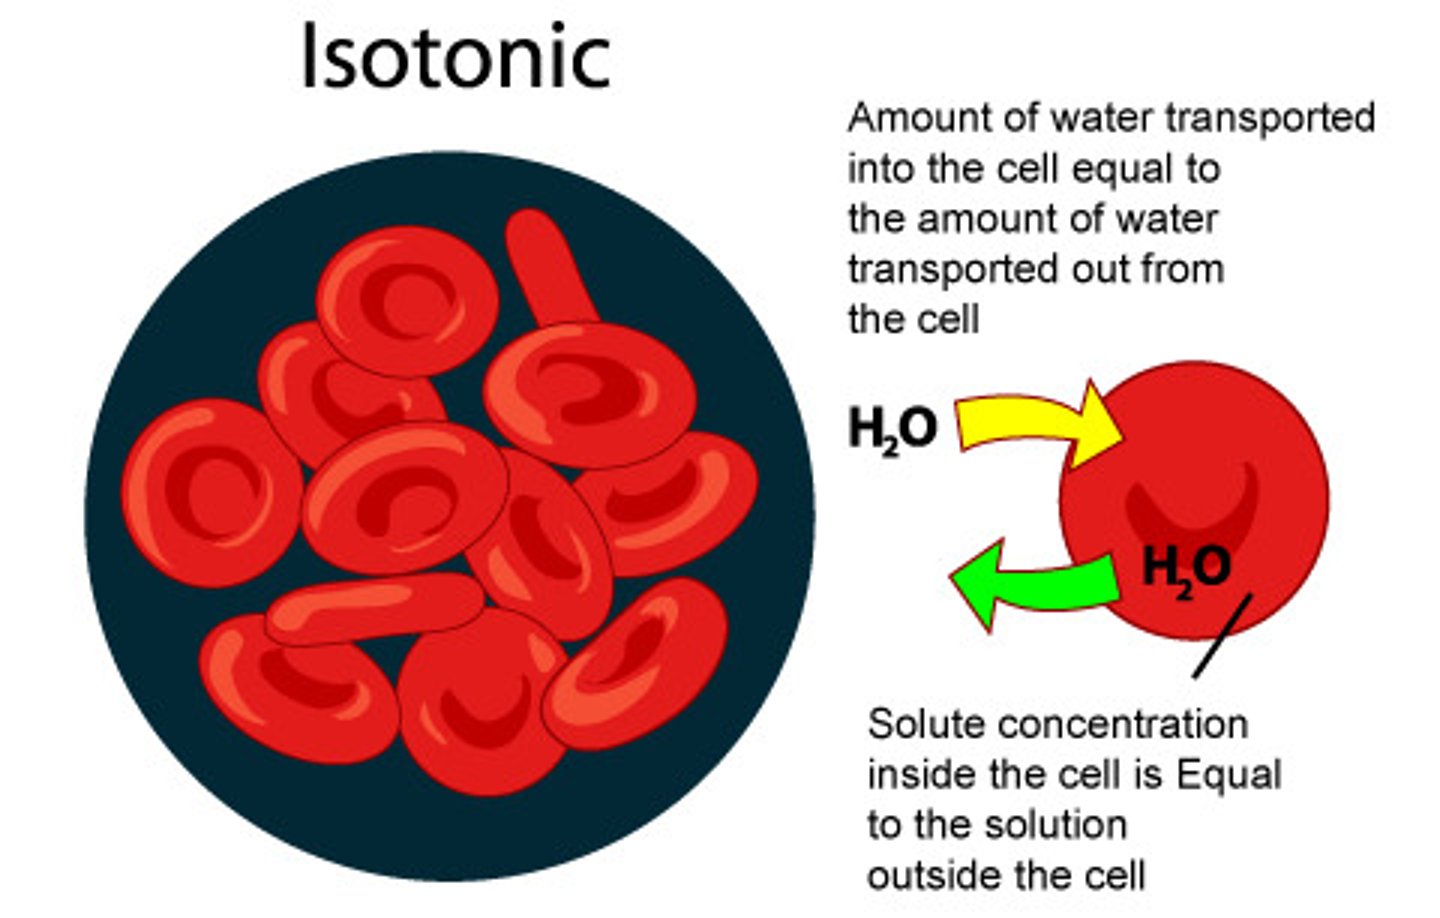 <p>Water enters and leaves the cell at the same rate, so no net change in the osmotic pressere. The cell stays the same.</p>